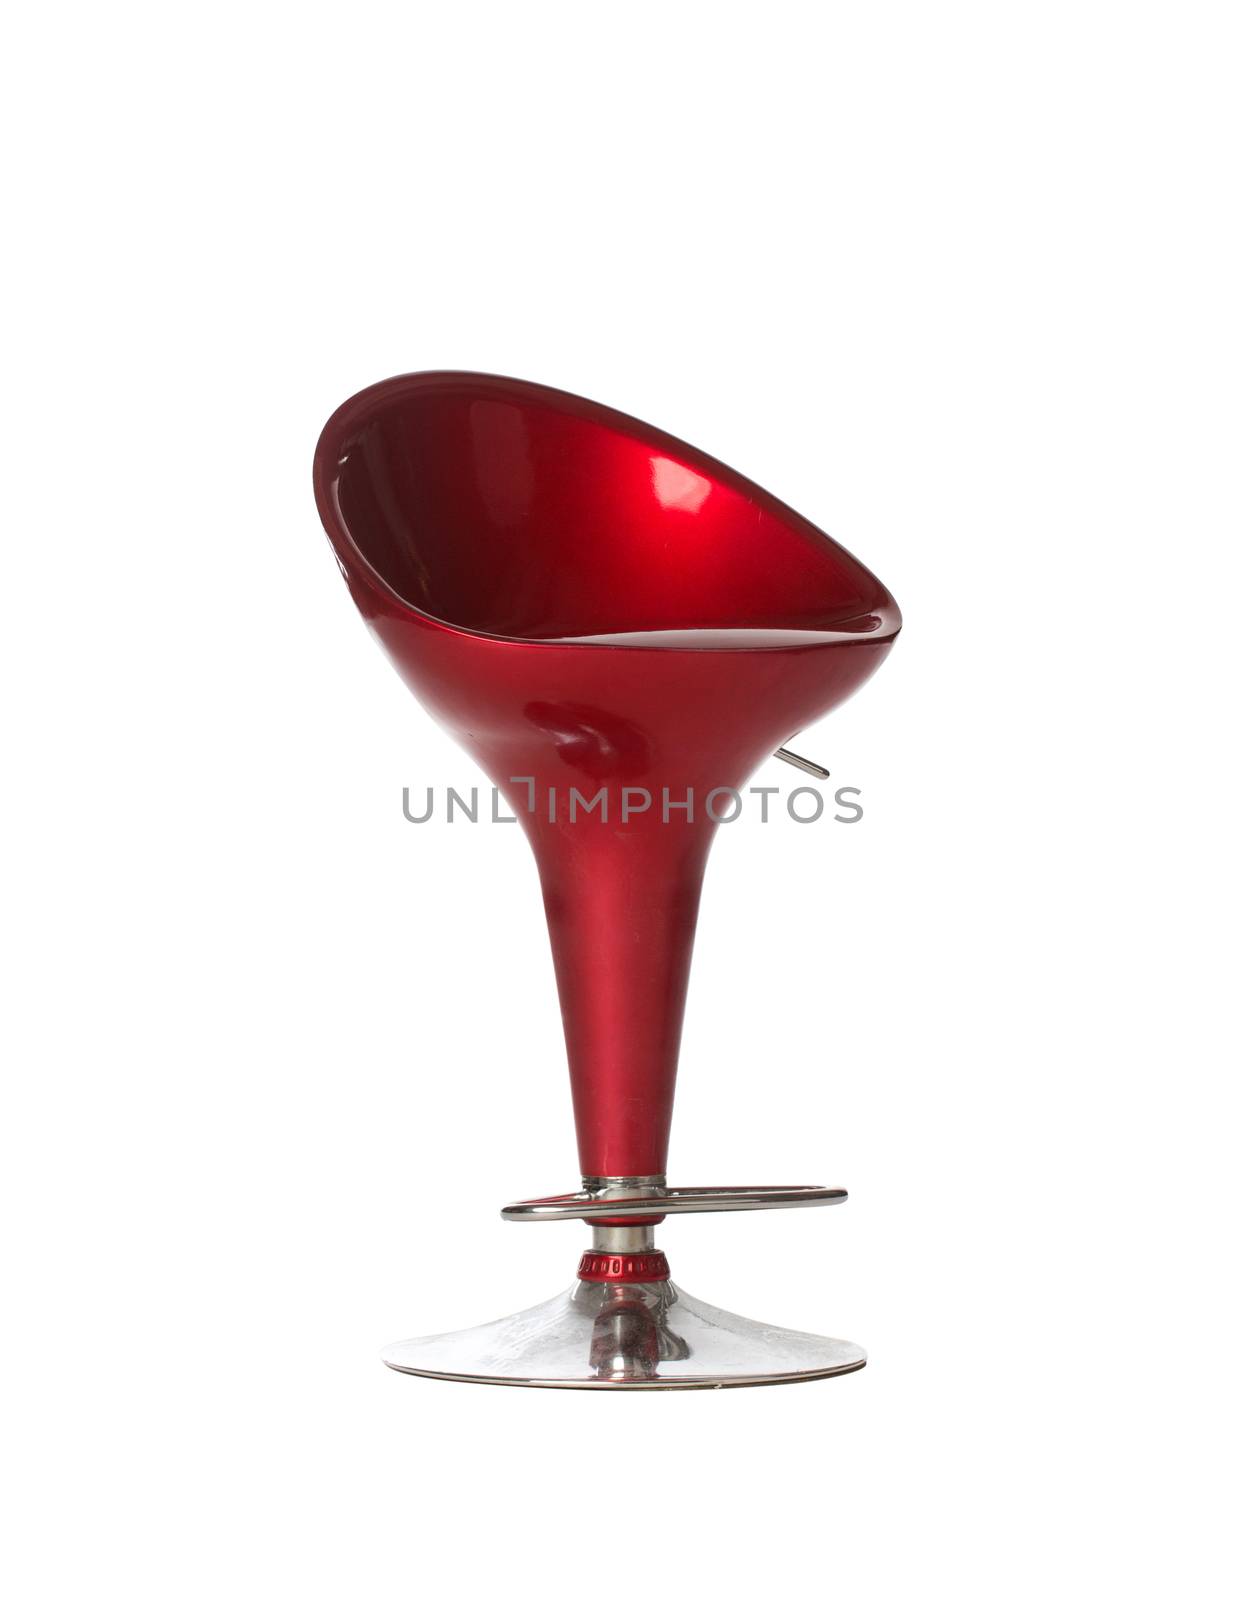 Modern chair in metal on white background, isolated on white